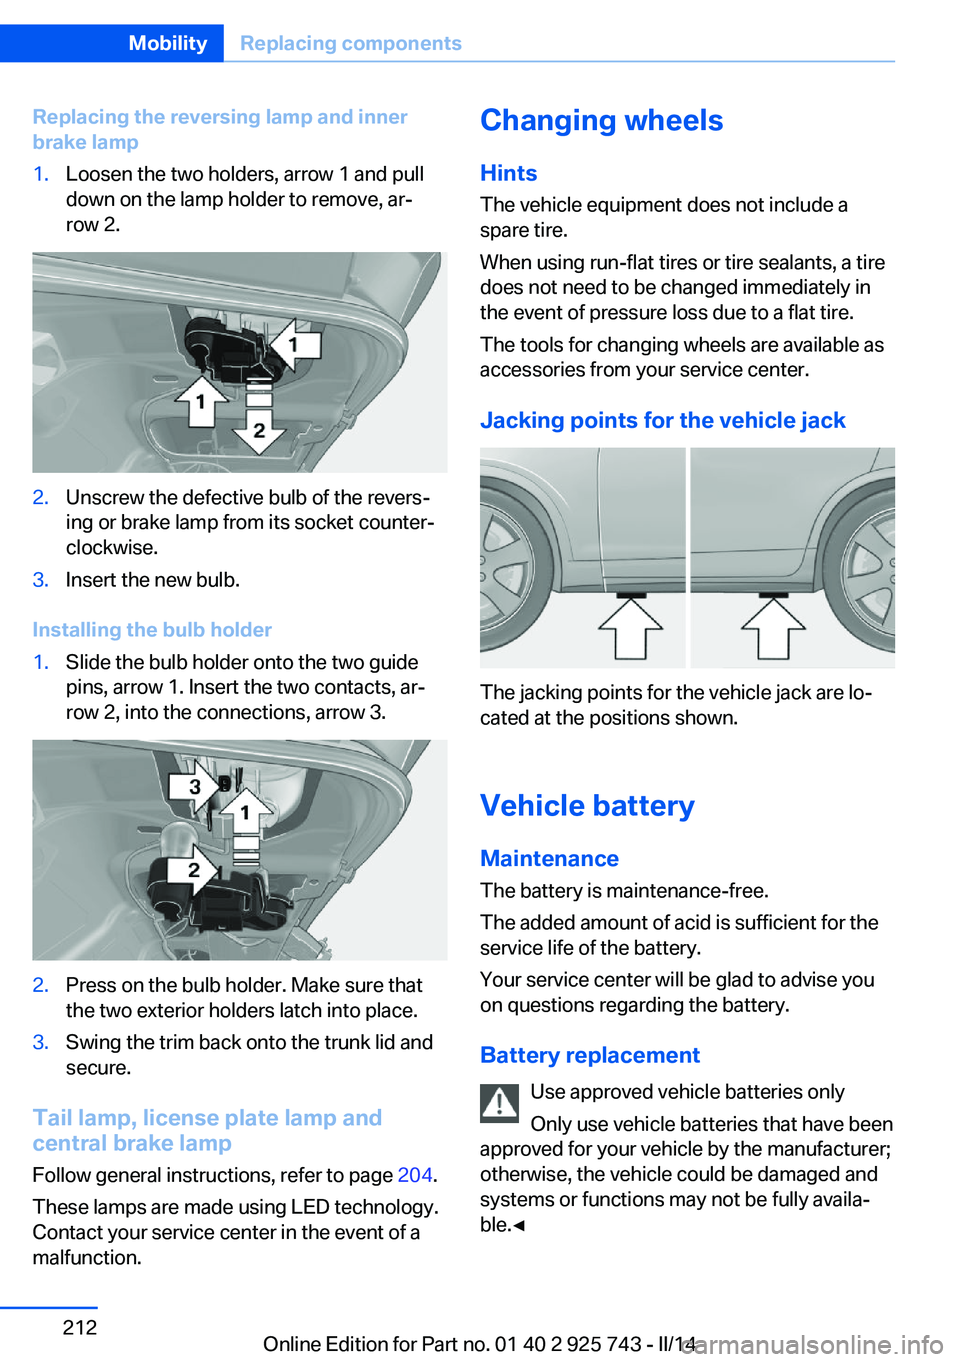 BMW 320I XDRIVE 2014  Owners Manual Replacing the reversing lamp and inner
brake lamp1.Loosen the two holders, arrow 1 and pull
down on the lamp holder to remove, ar‐
row 2.2.Unscrew the defective bulb of the revers‐
ing or brake la